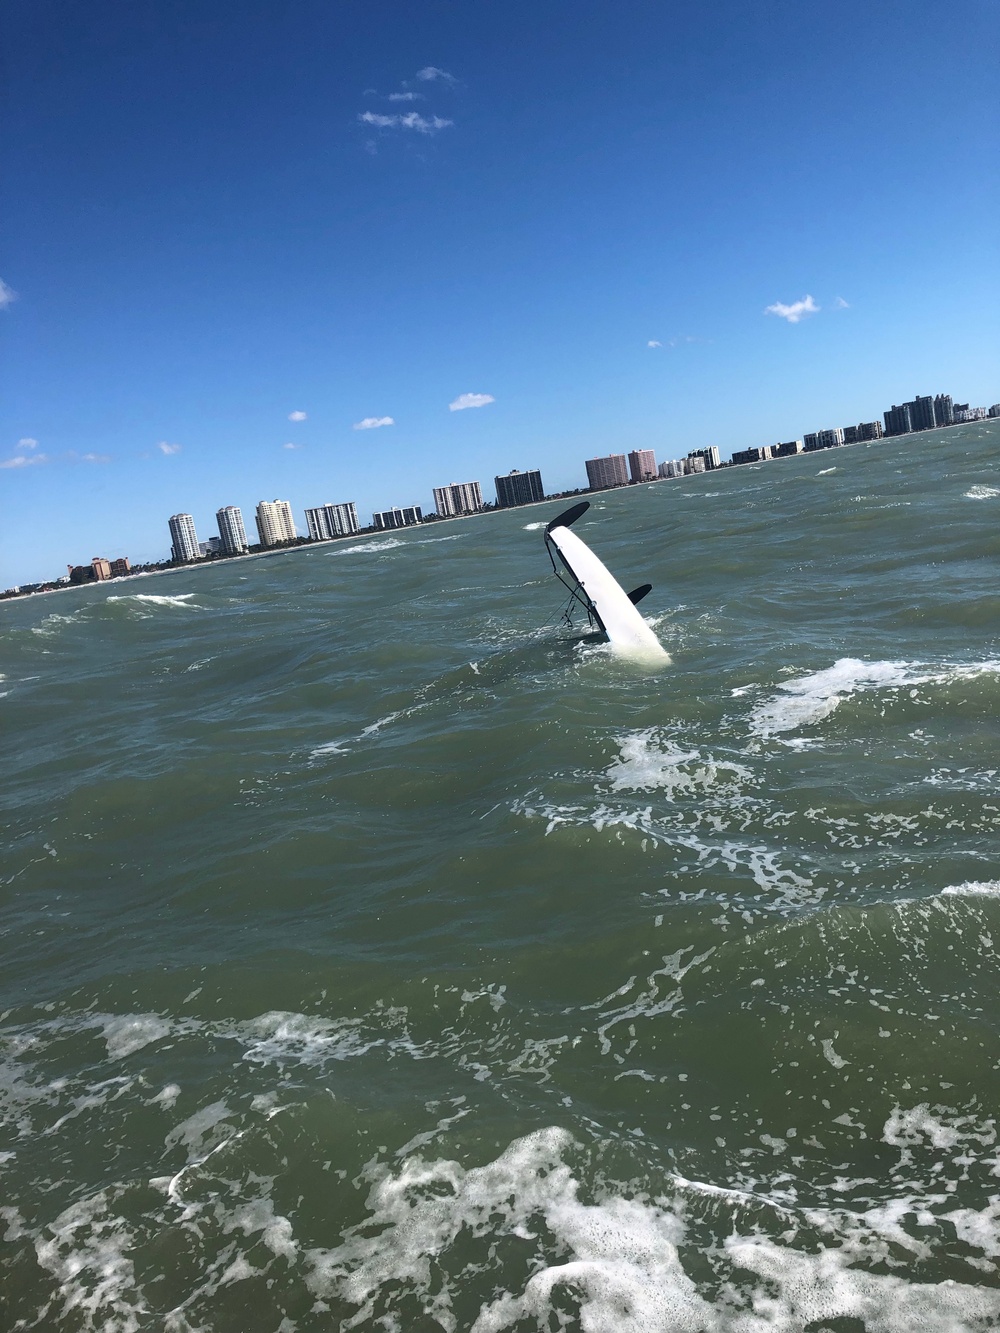 Coast Guard rescues 3 people after boat capsizes